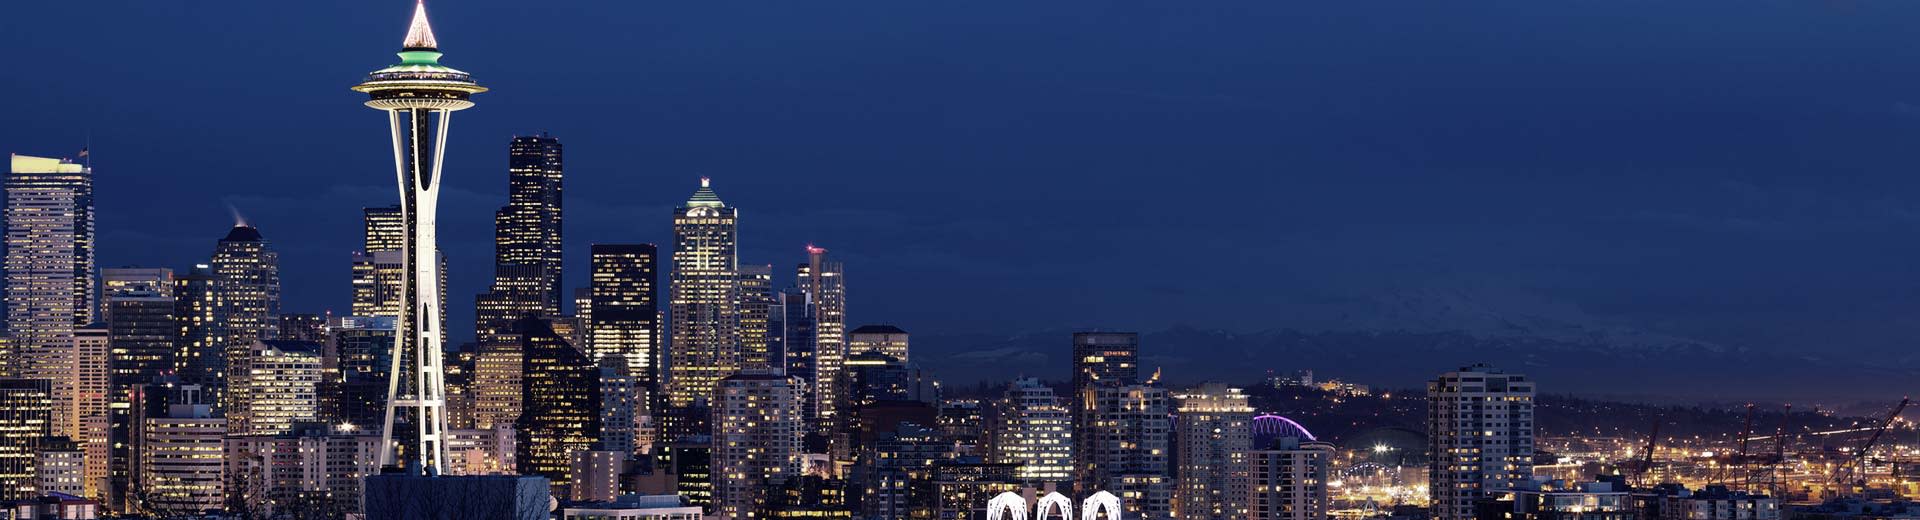 The famous Space Needle of Seattle looms into the nightsky, surrounded by omposing skyscrapers and apartment buildings.